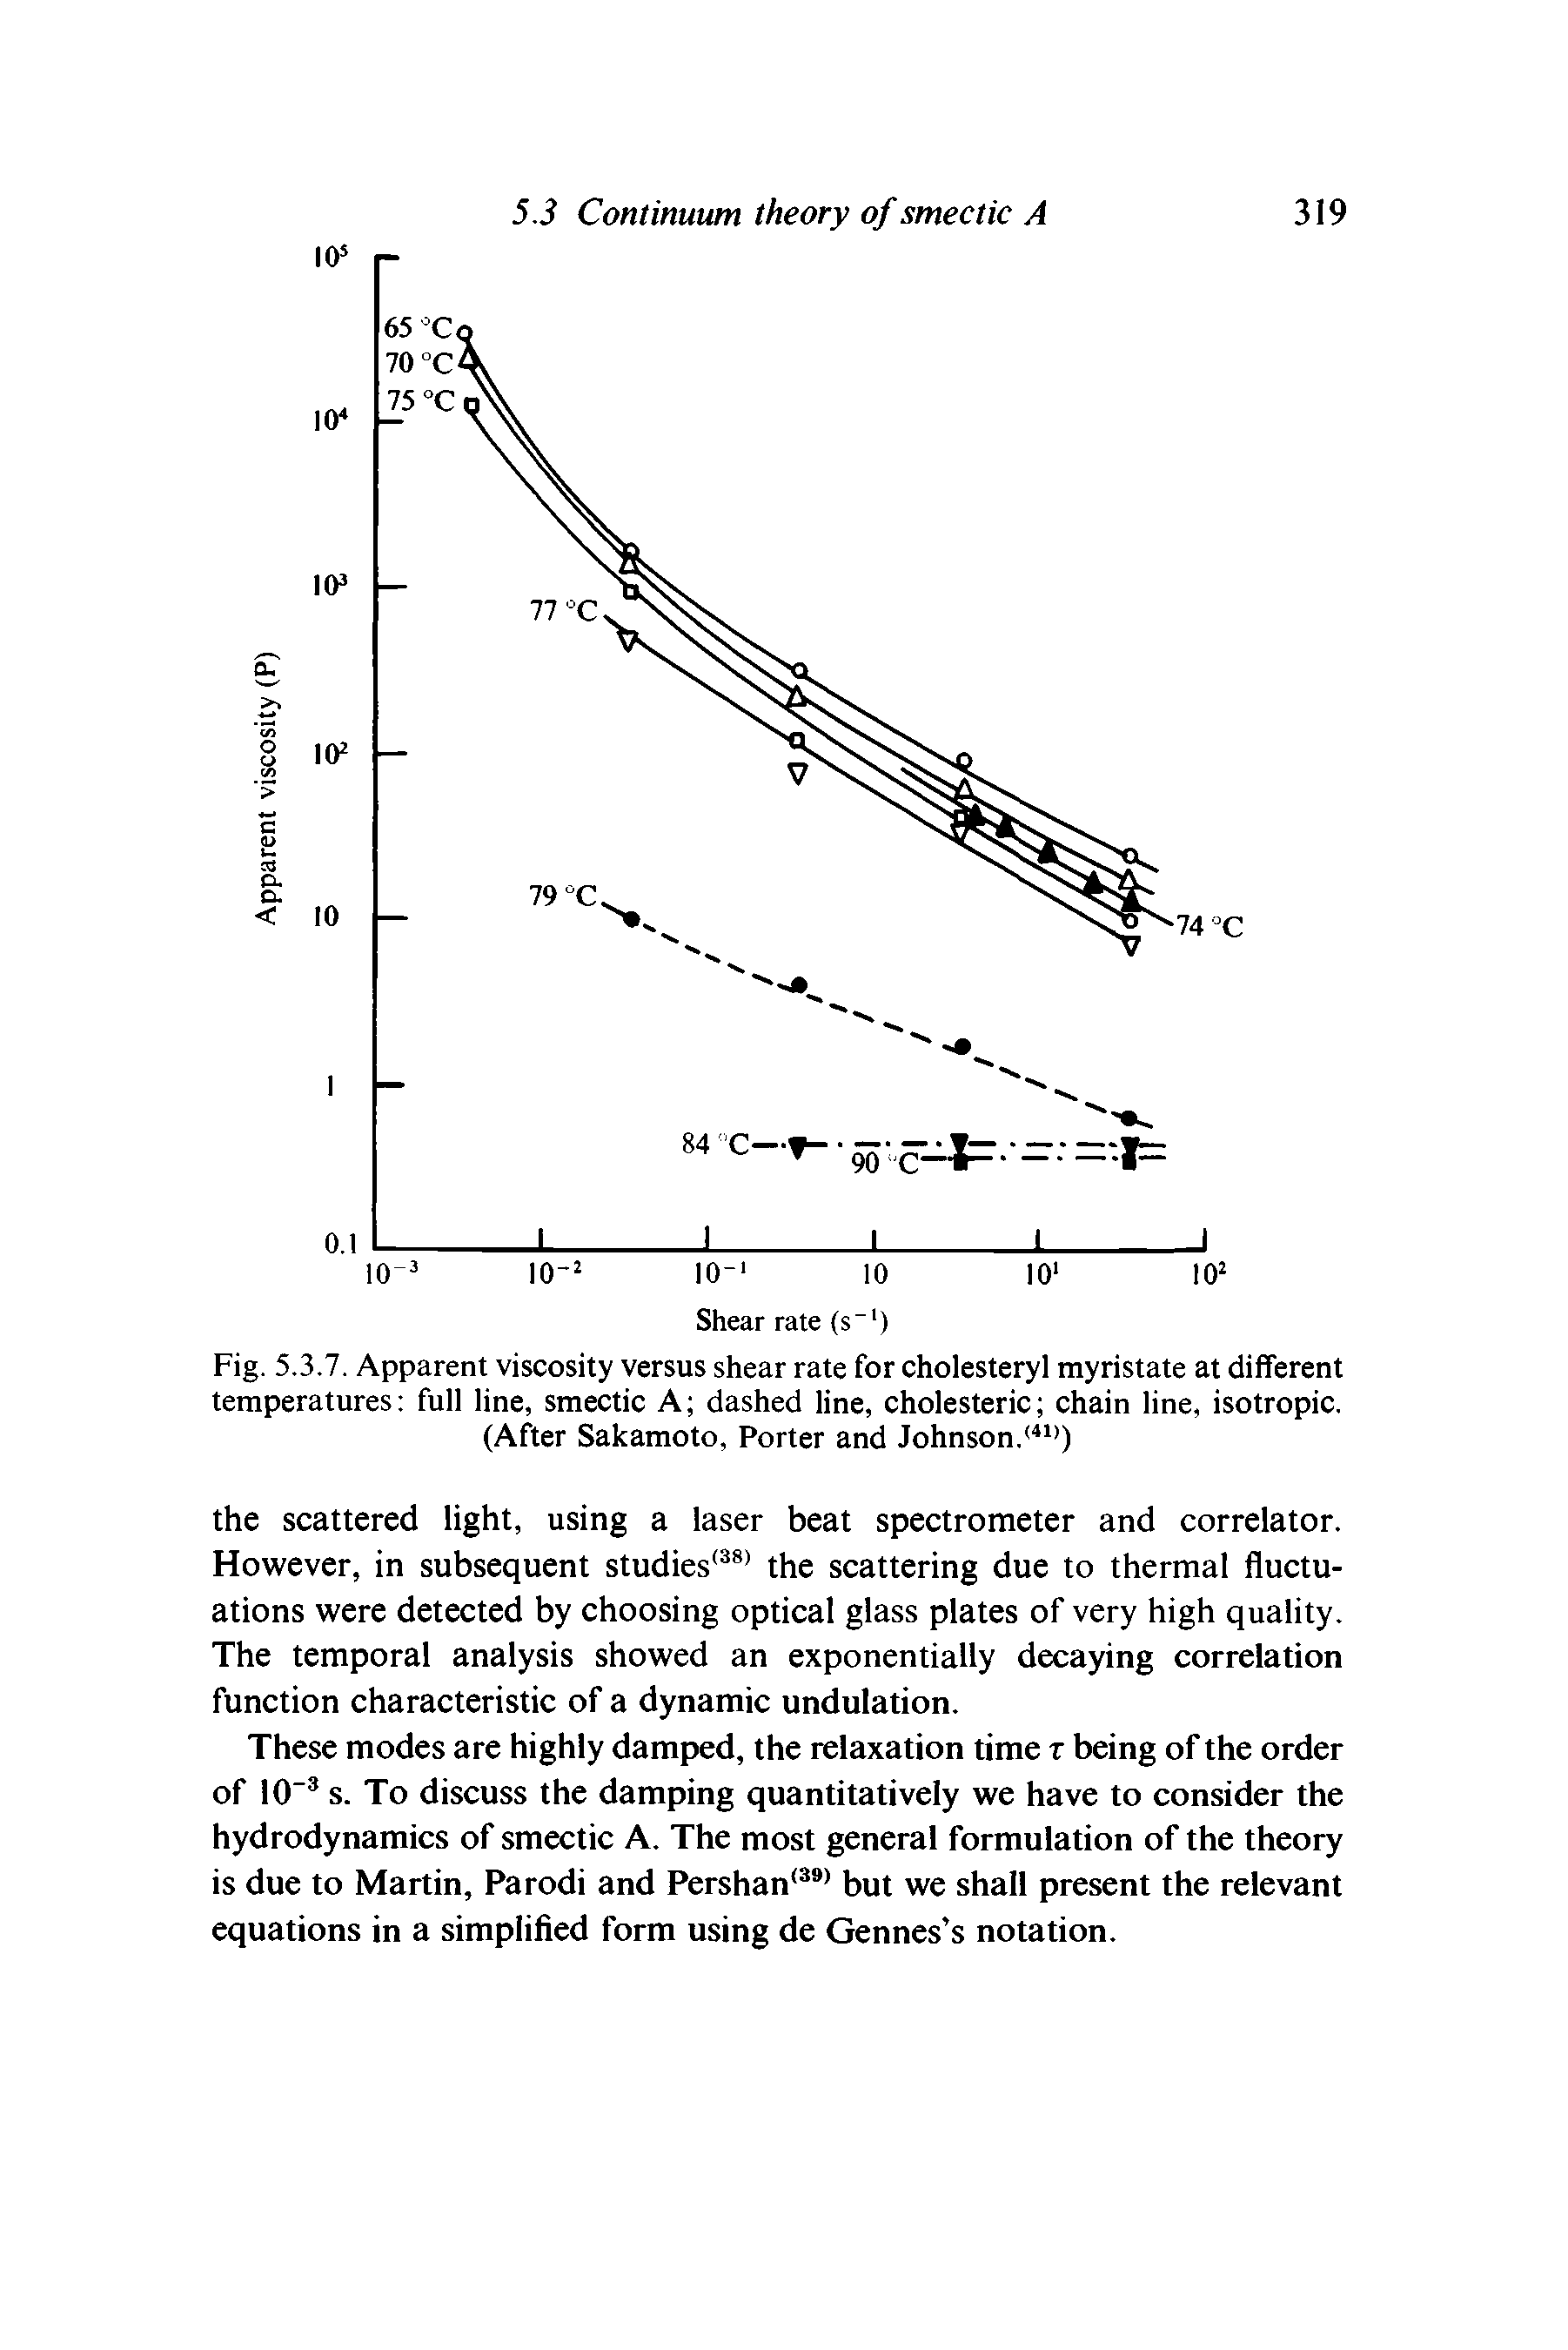 Fig. 5.3.7. Apparent viscosity versus shear rate for cholesteryl myristate at different temperatures full line, smectic A dashed line, cholesteric chain line, isotropic. (After Sakamoto, Porter and Johnson.